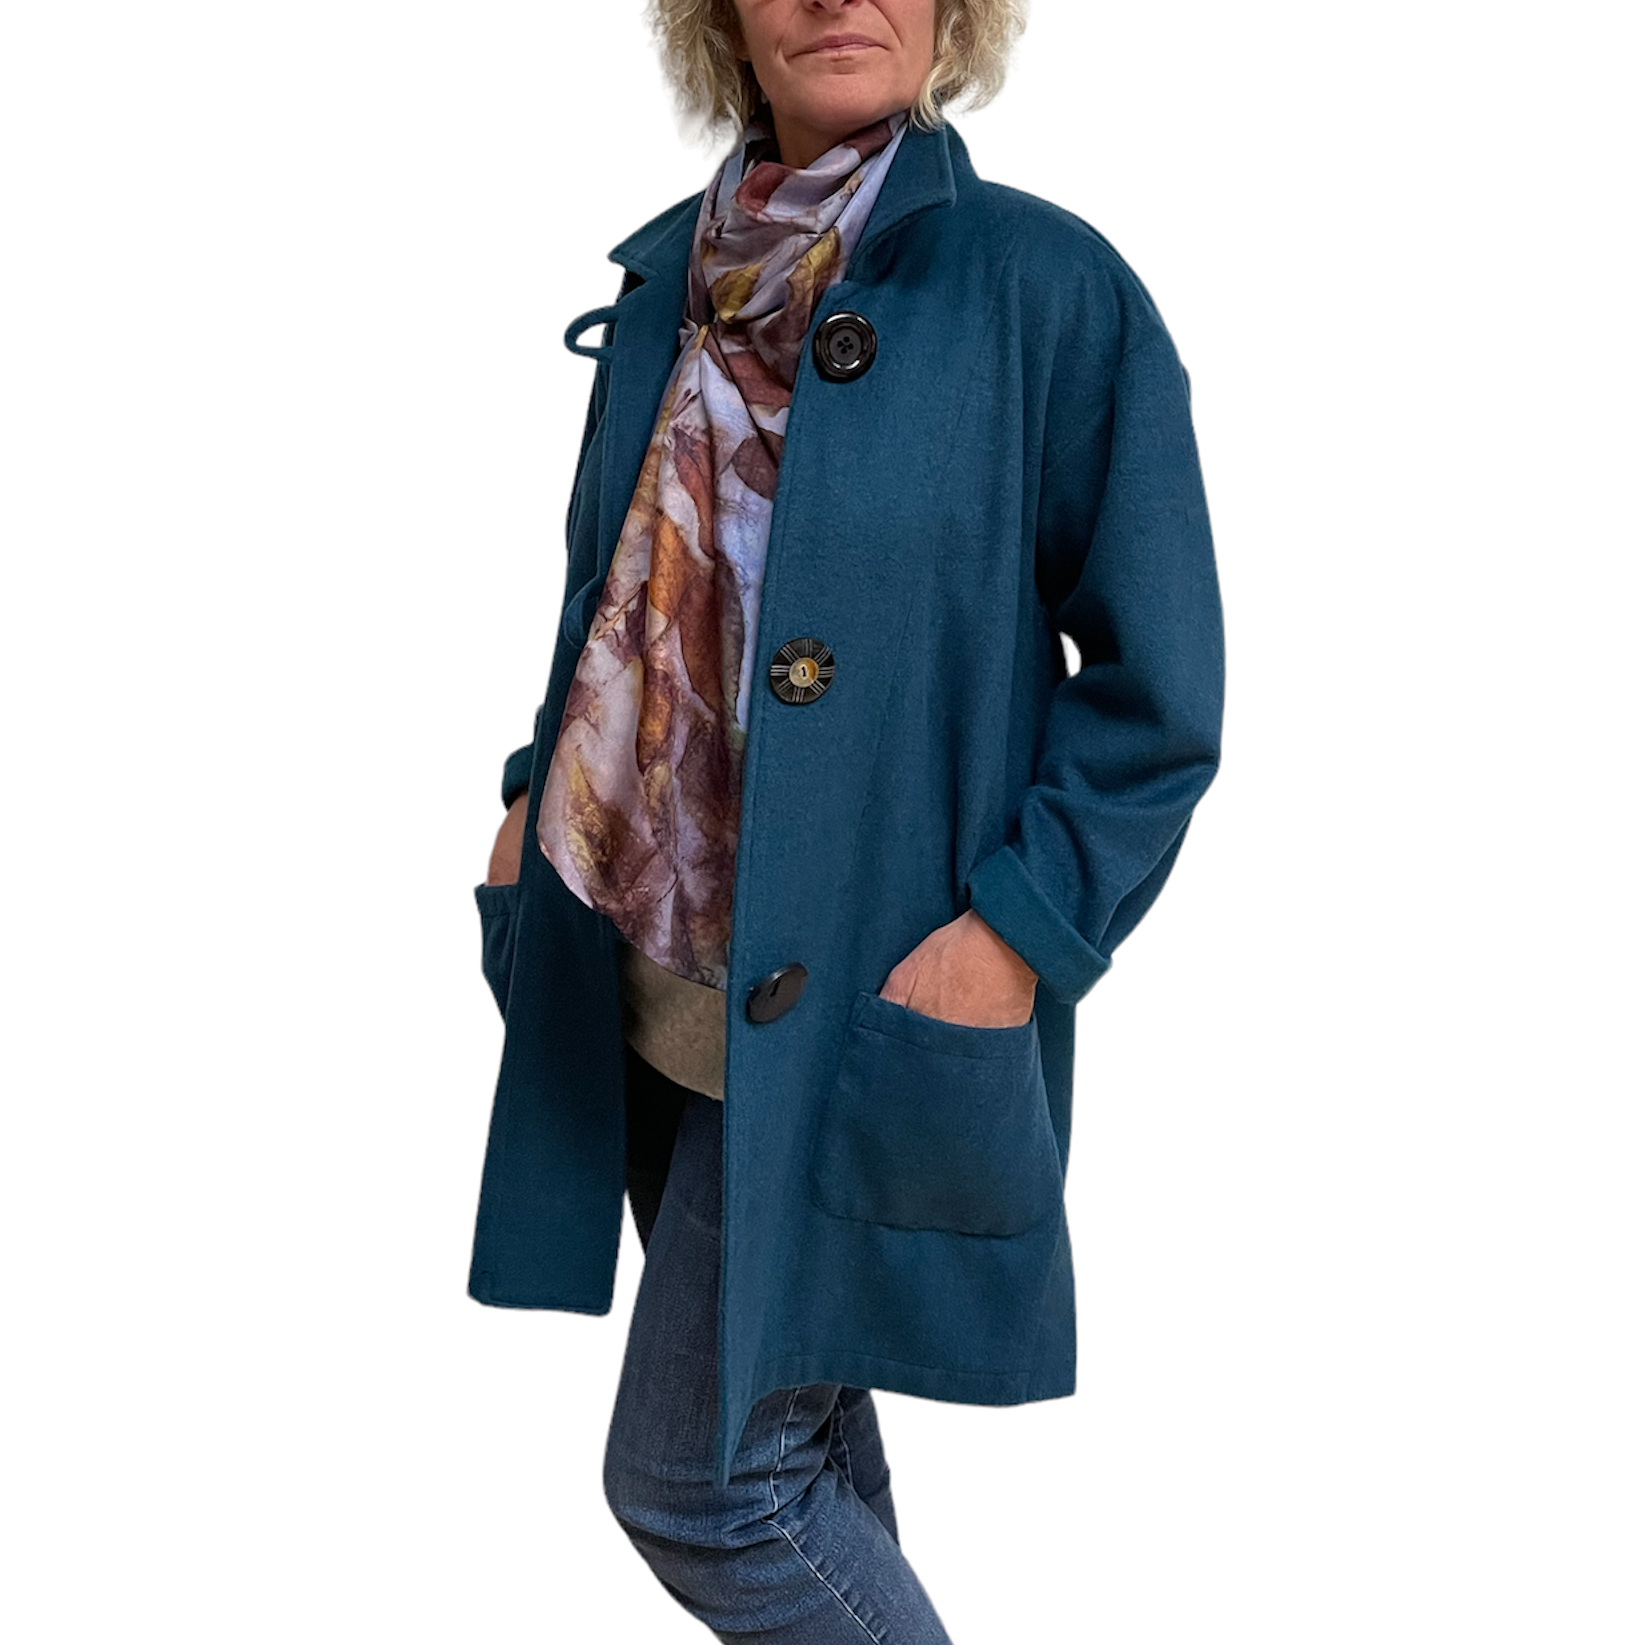 Unique women's soft teal wool mid thigh jacket